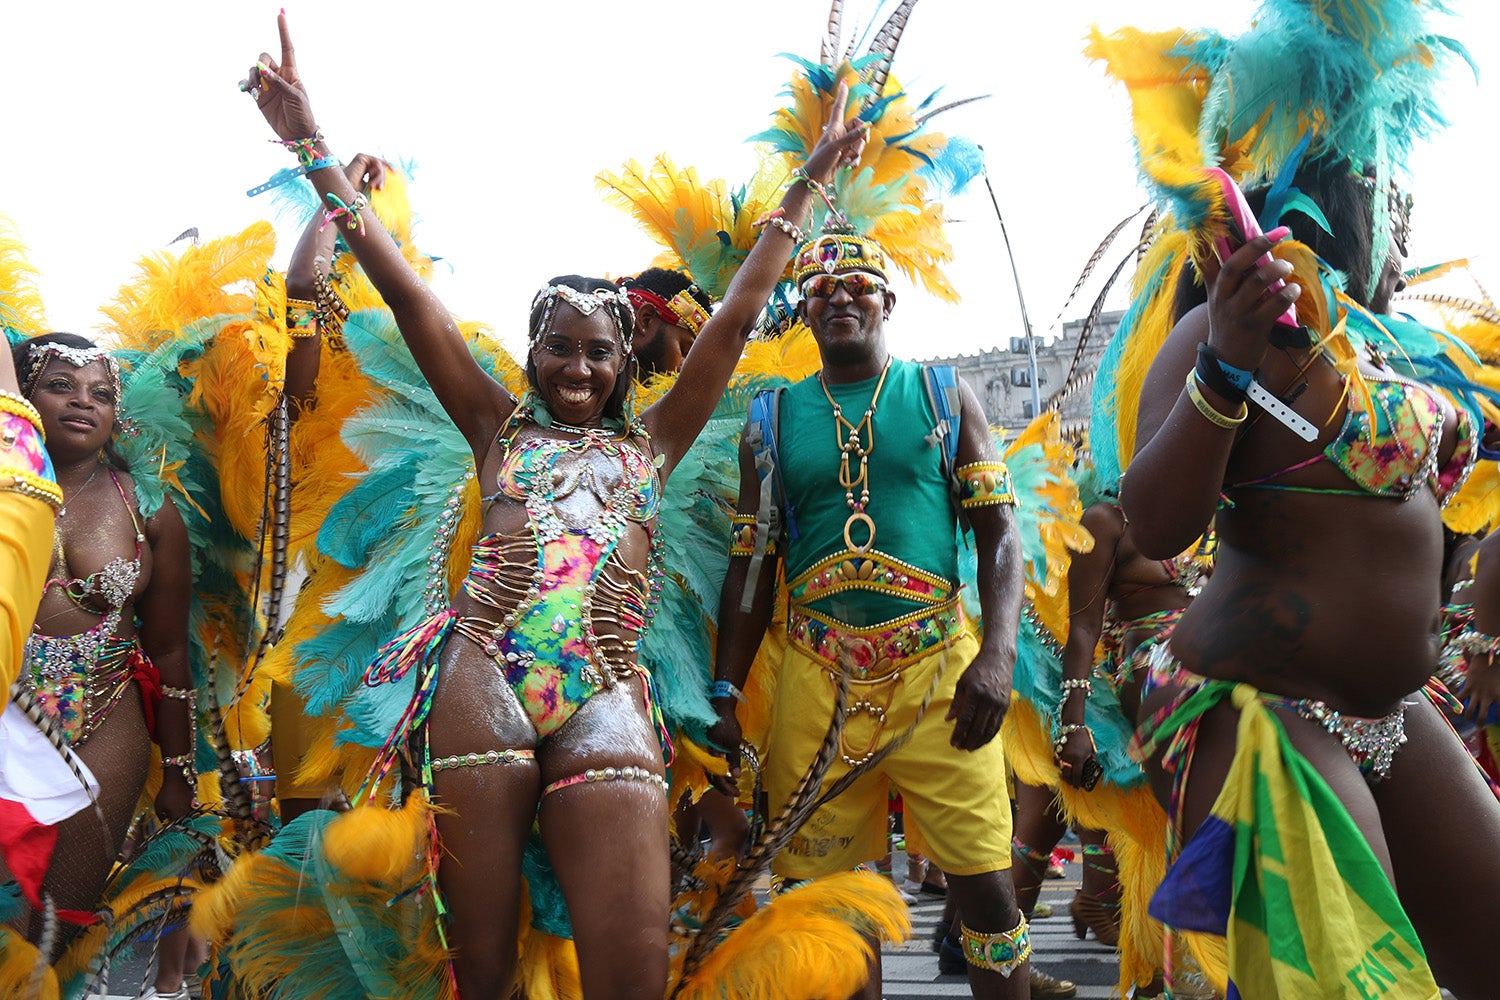 Jaw-Dropping Photos From The West Indian Day Parade
